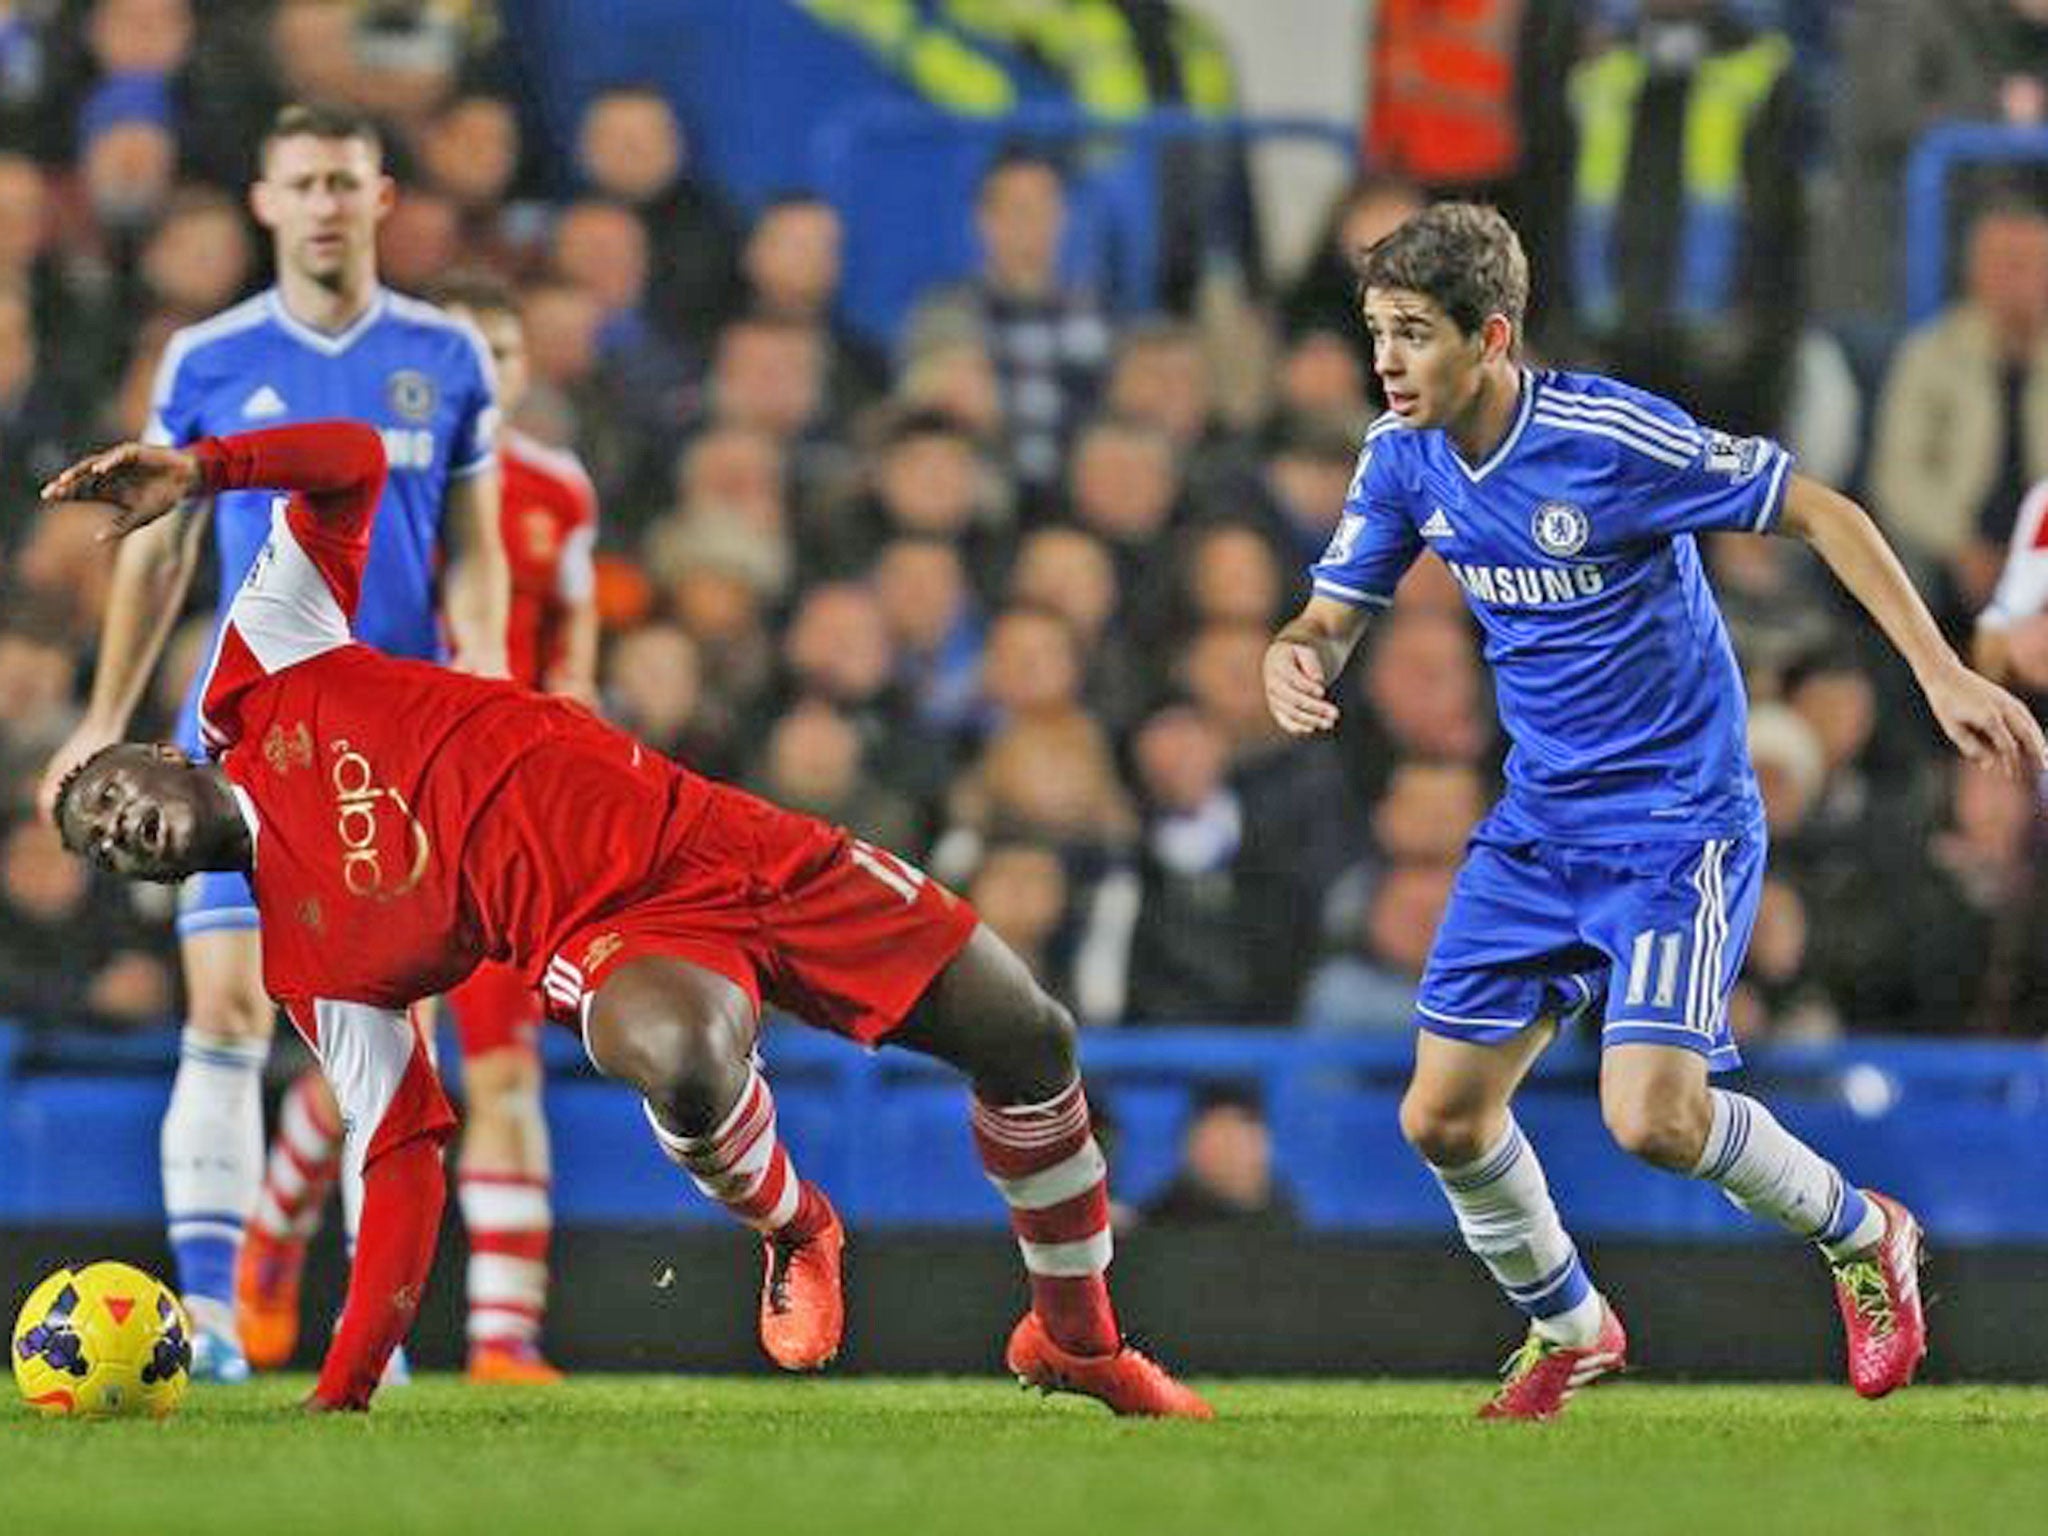 Chelsea's Oscar, right, fights for the ball with Southampton's Victor Wanyama, left, during their English Premier League football match at the Stamford bridge